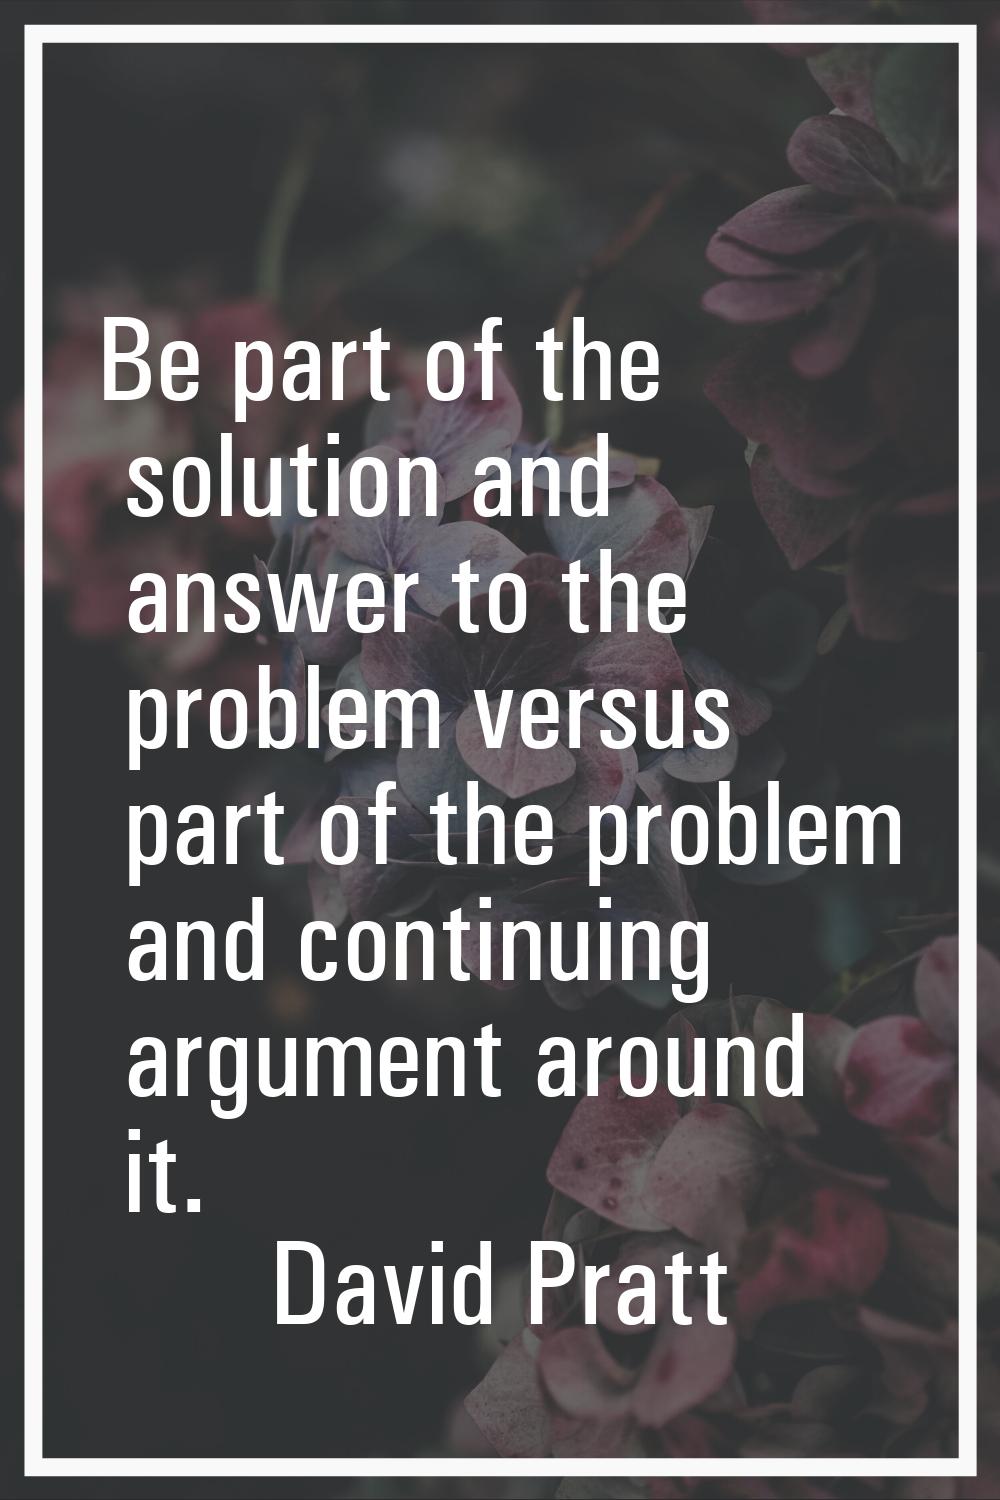 Be part of the solution and answer to the problem versus part of the problem and continuing argumen